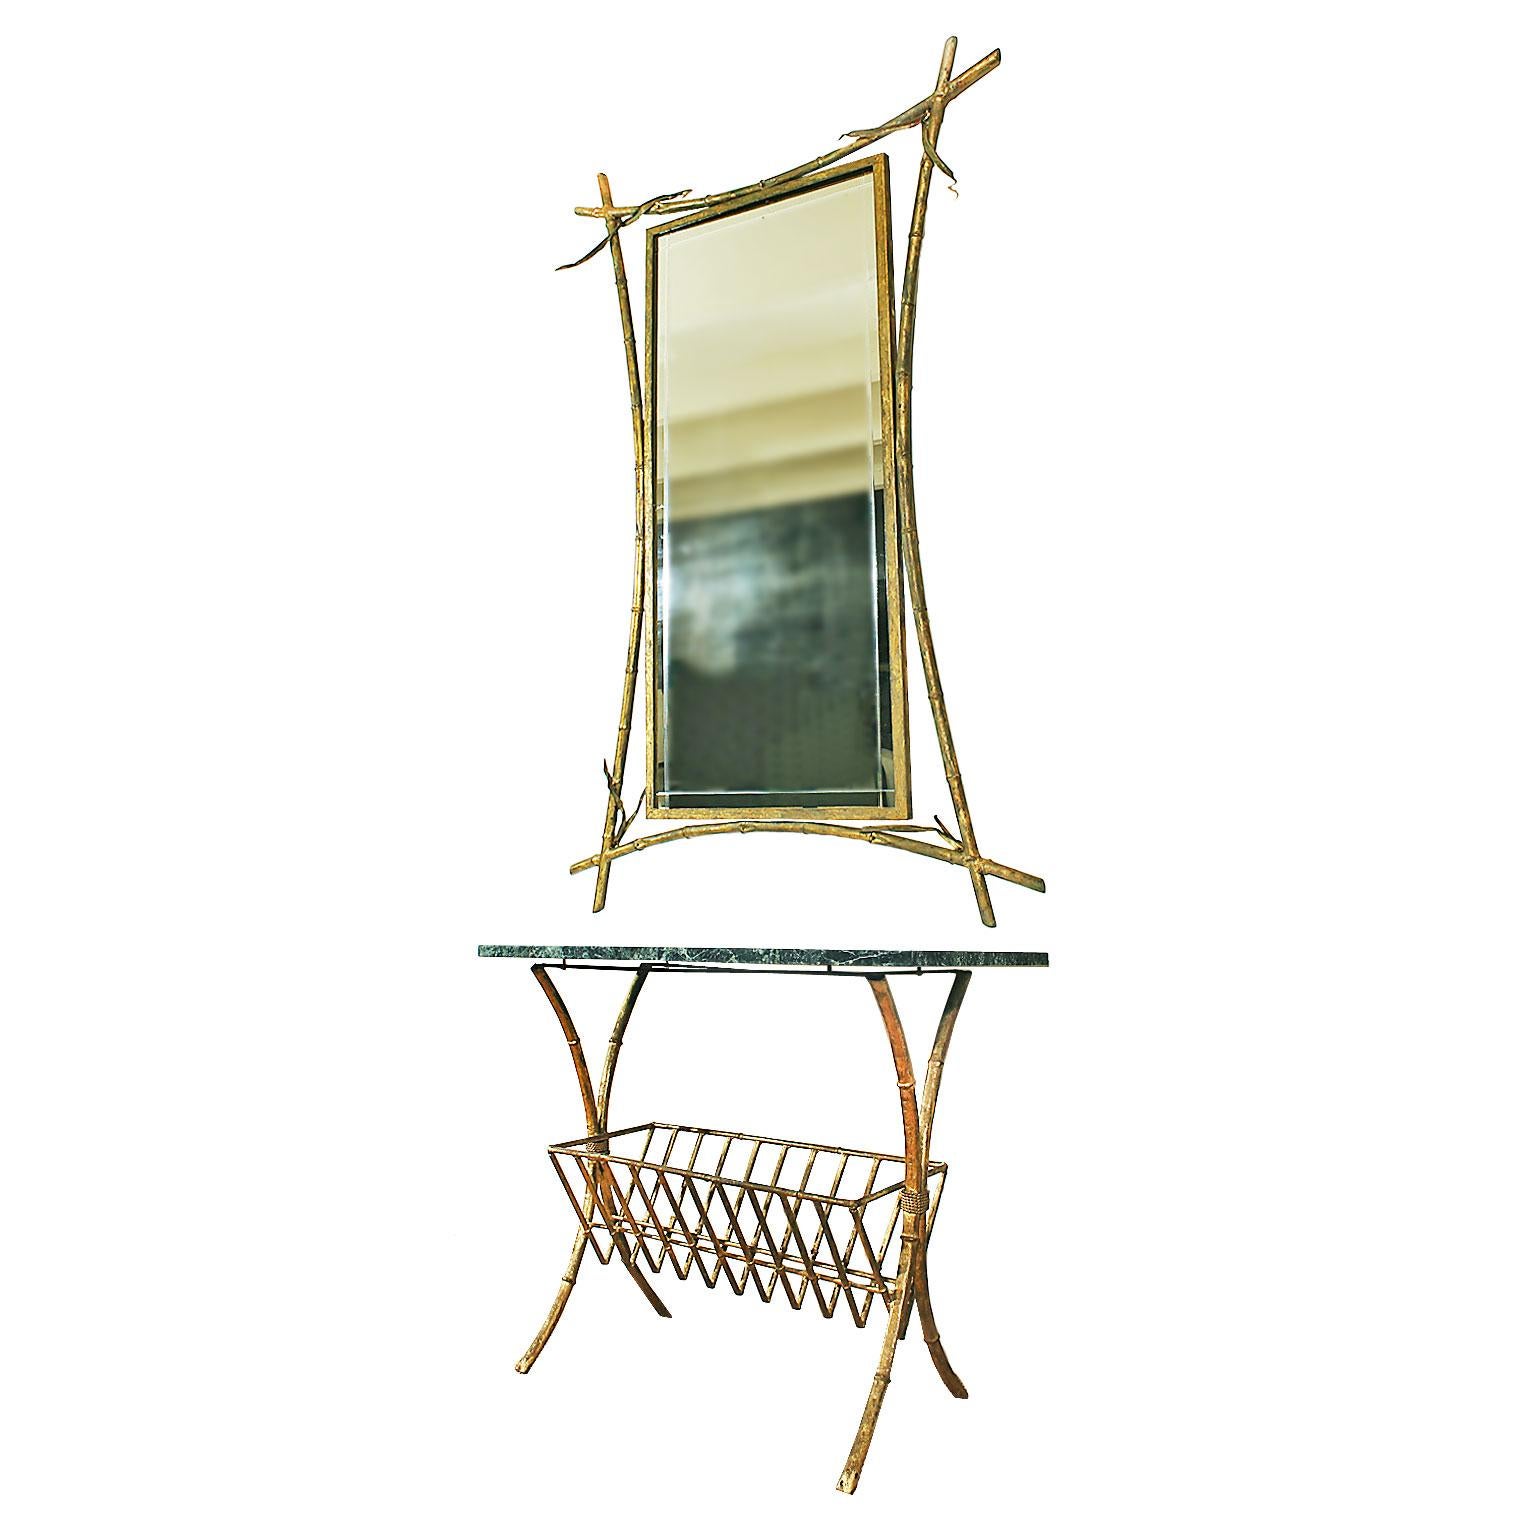 Console, mirror and magazine rack ensemble, original golden patina metal, polished green marble on top of the console.
Spain, circa 1950.

Console: 40 cm x 80 cm x 69 cm.
Mirror: 3 cm x 89 cm x 145 cm.